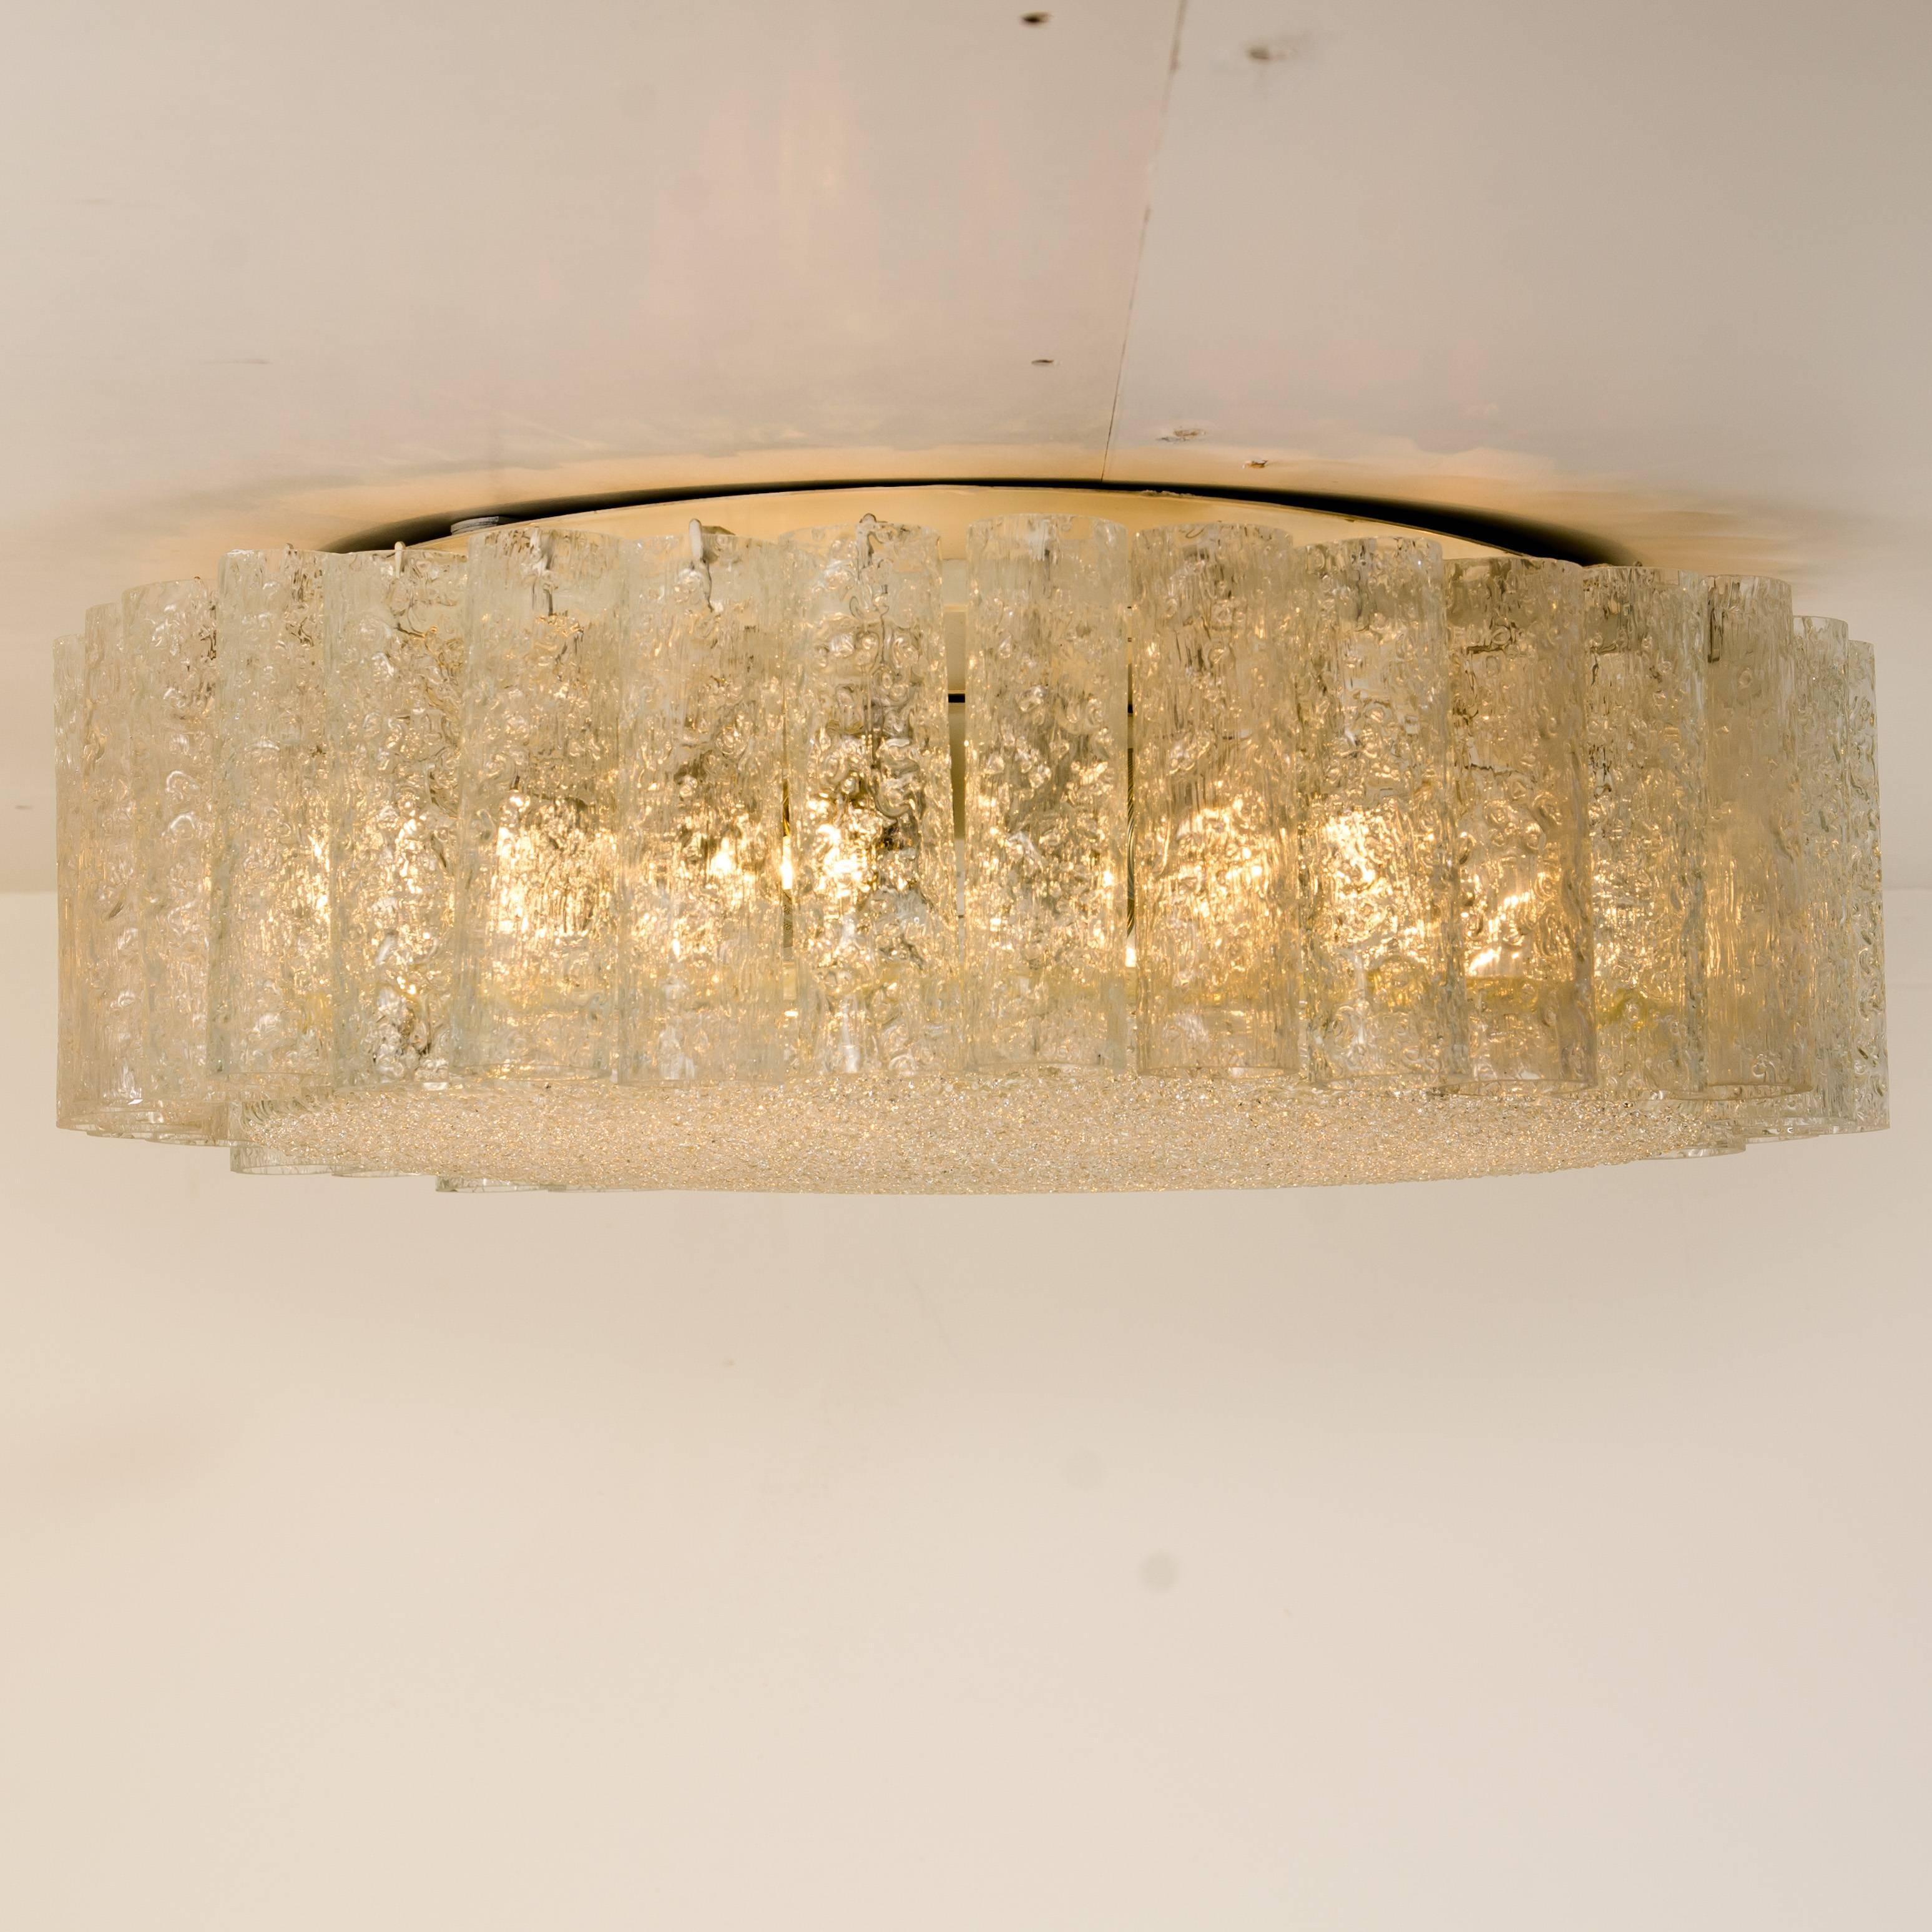 Wonderful set of four high end light fixtures. Two extra large flushmounts and two chandeliers by Doria (Germany) manufactured in the early 1960s-1970s.

Hanging cylinders of textured organic glass tubes. For a clean and elegant look. The glass